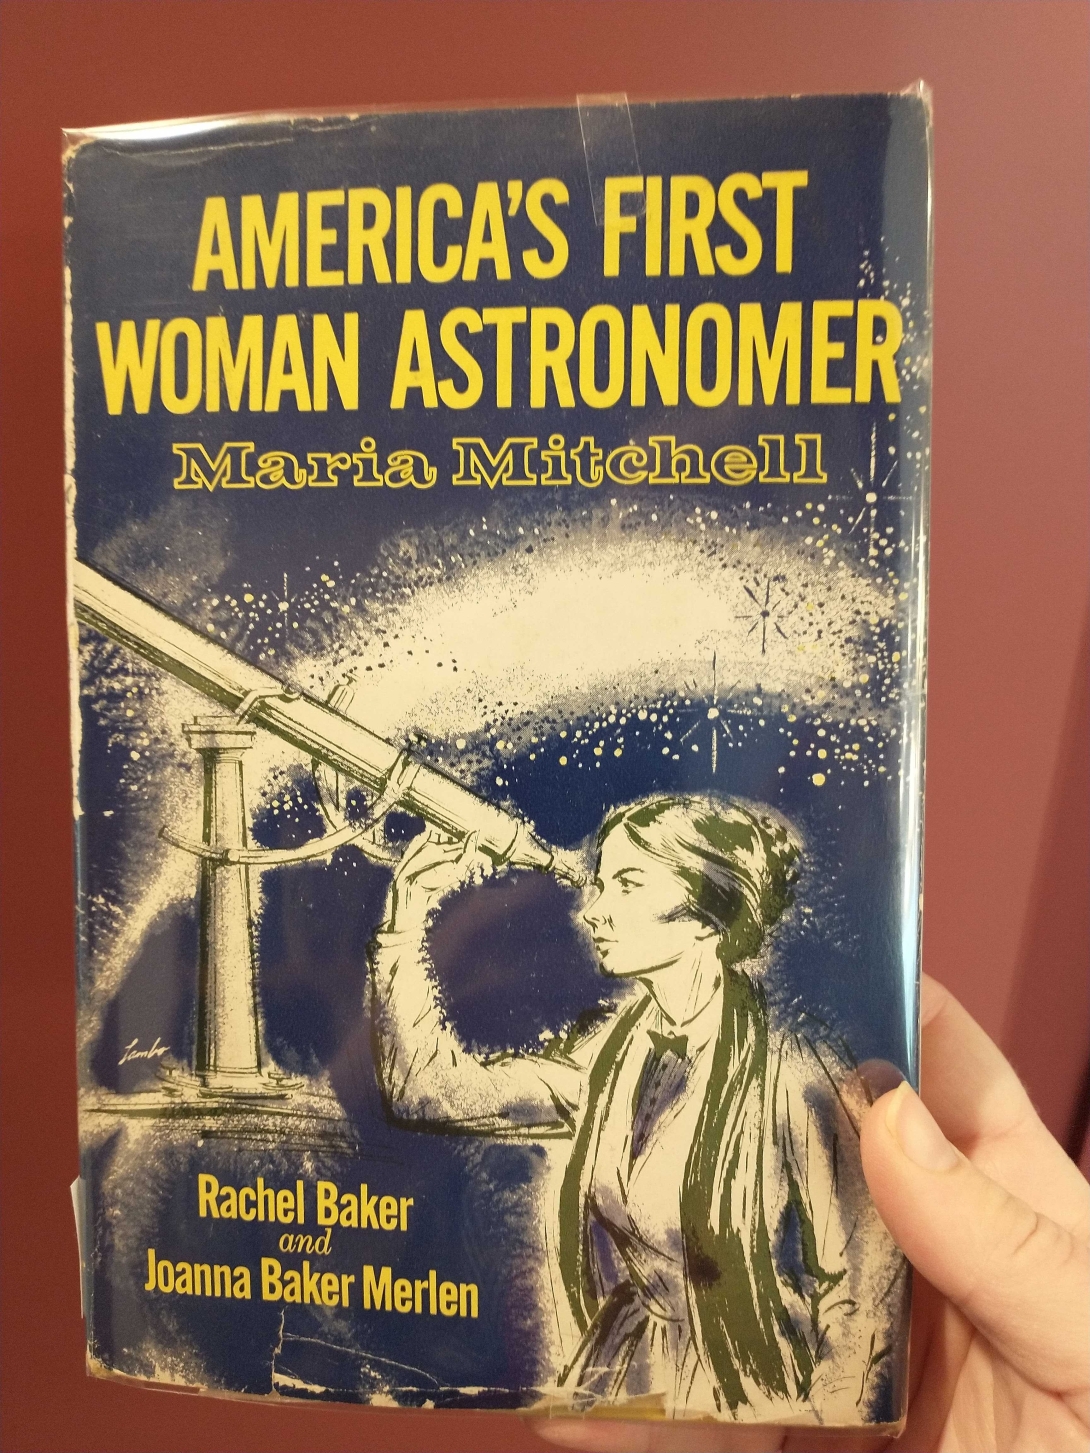 America’s First Woman Astronomer: Maria Mitchell cover